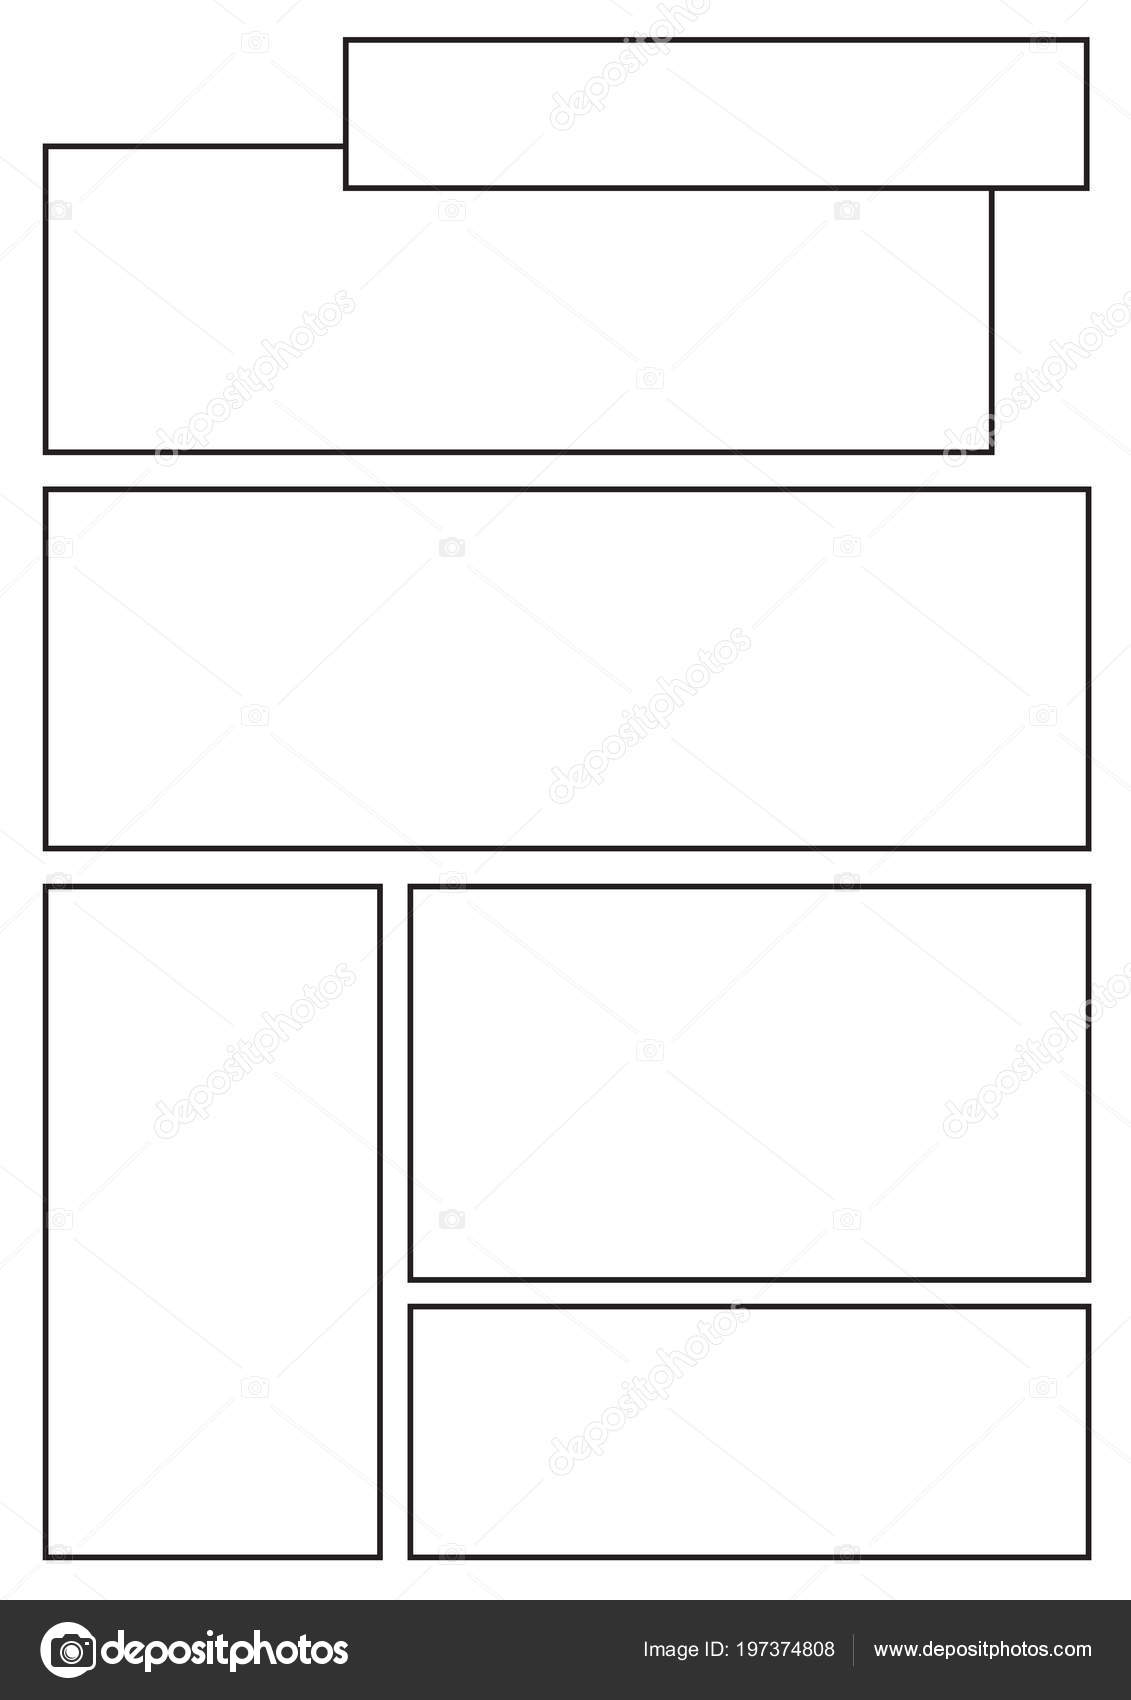 Manga Storyboard Layout Template Rapidly Create Comic Book Style Design  Stock Vector by ©realcg 197374808